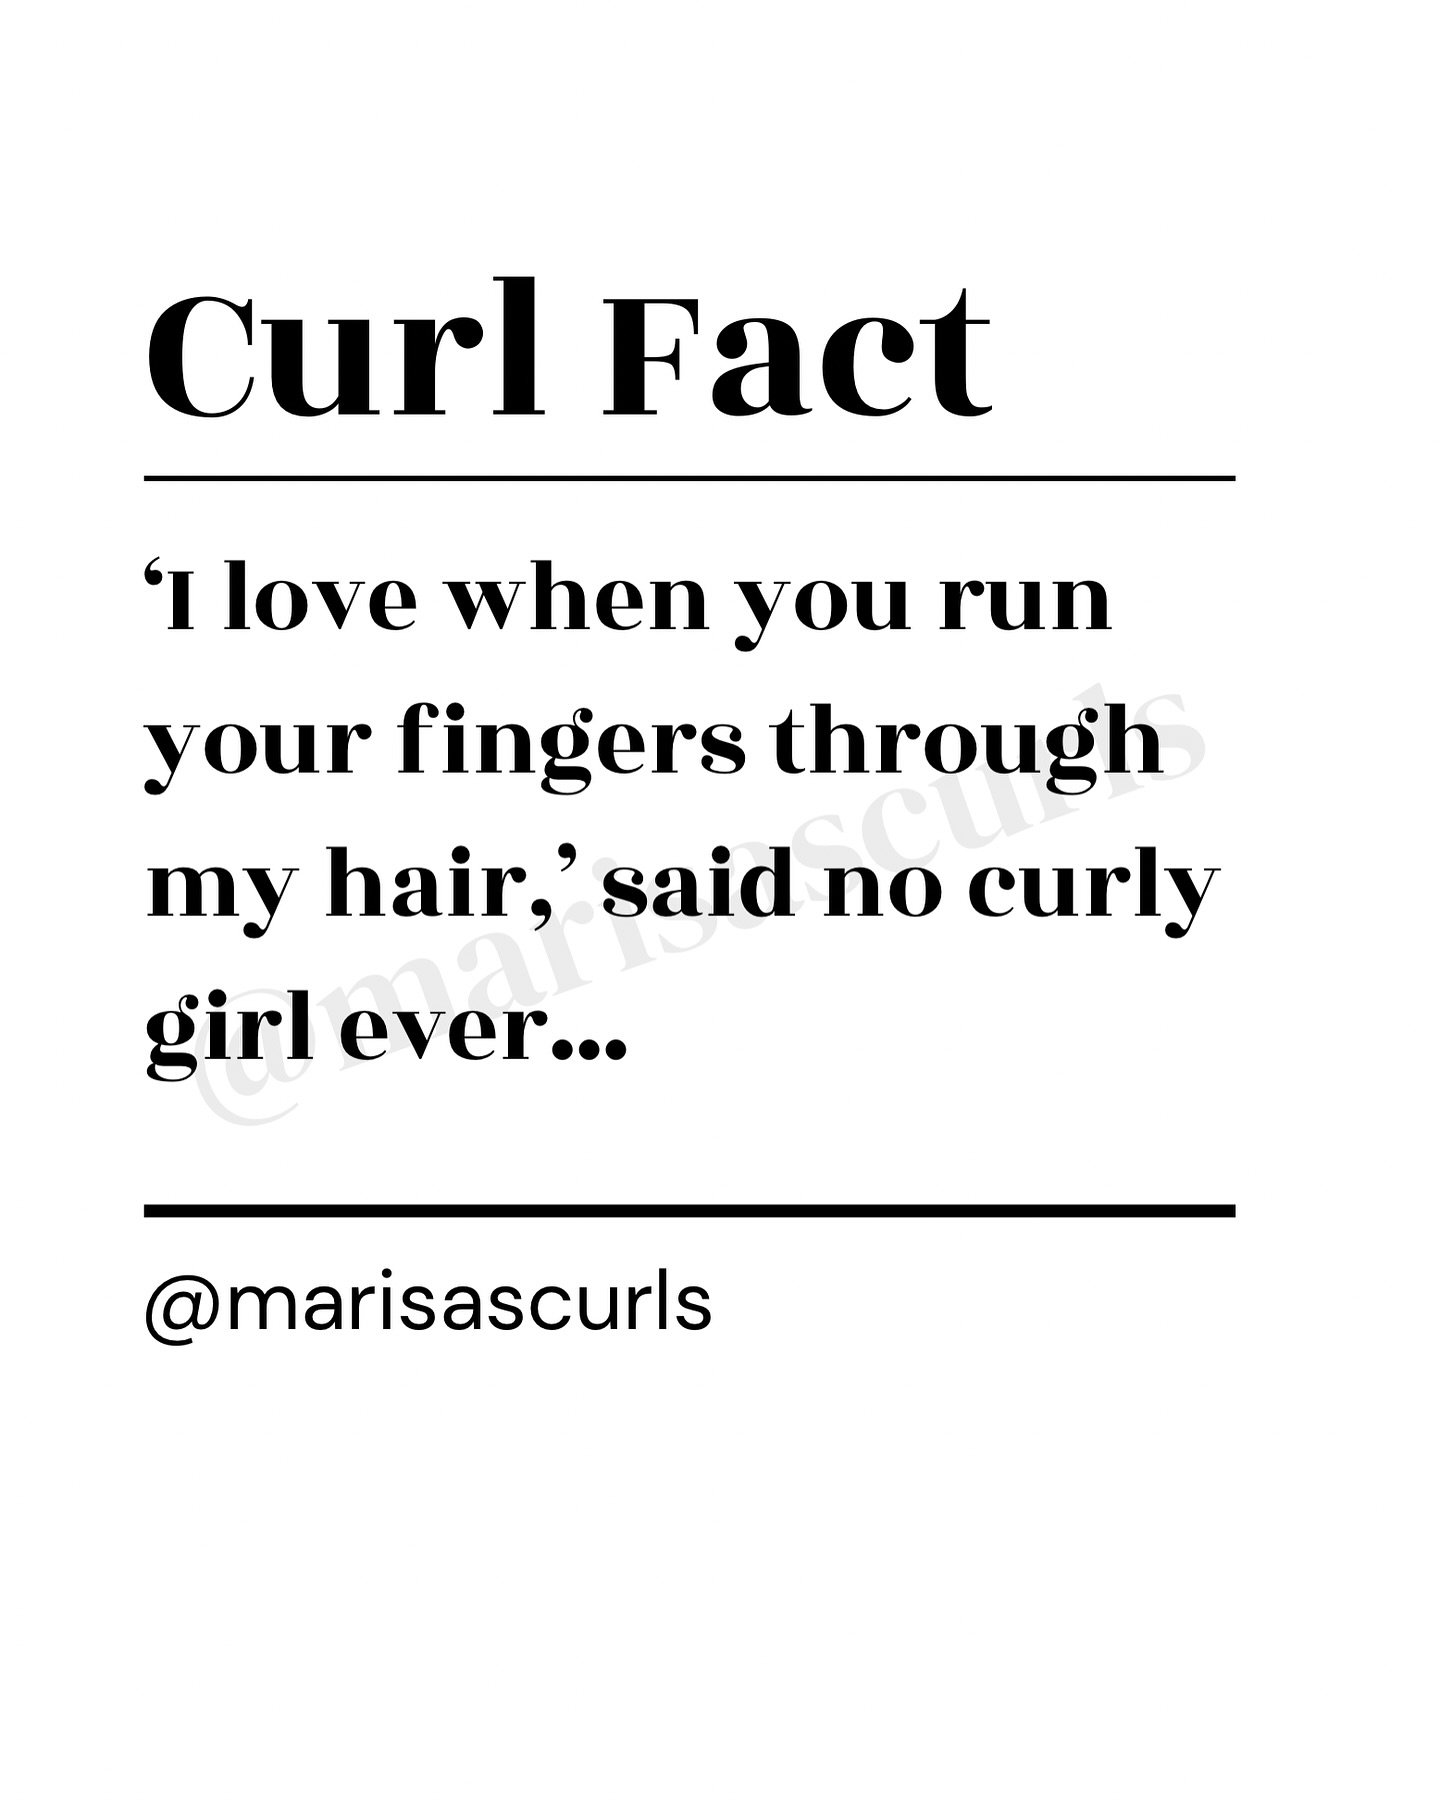 A gentle scrunching motion would be fine thanks 😂

#curlyhair #dontrunyourfingersthroughmyhair #curlfact #curlycomedy #relatablecurls